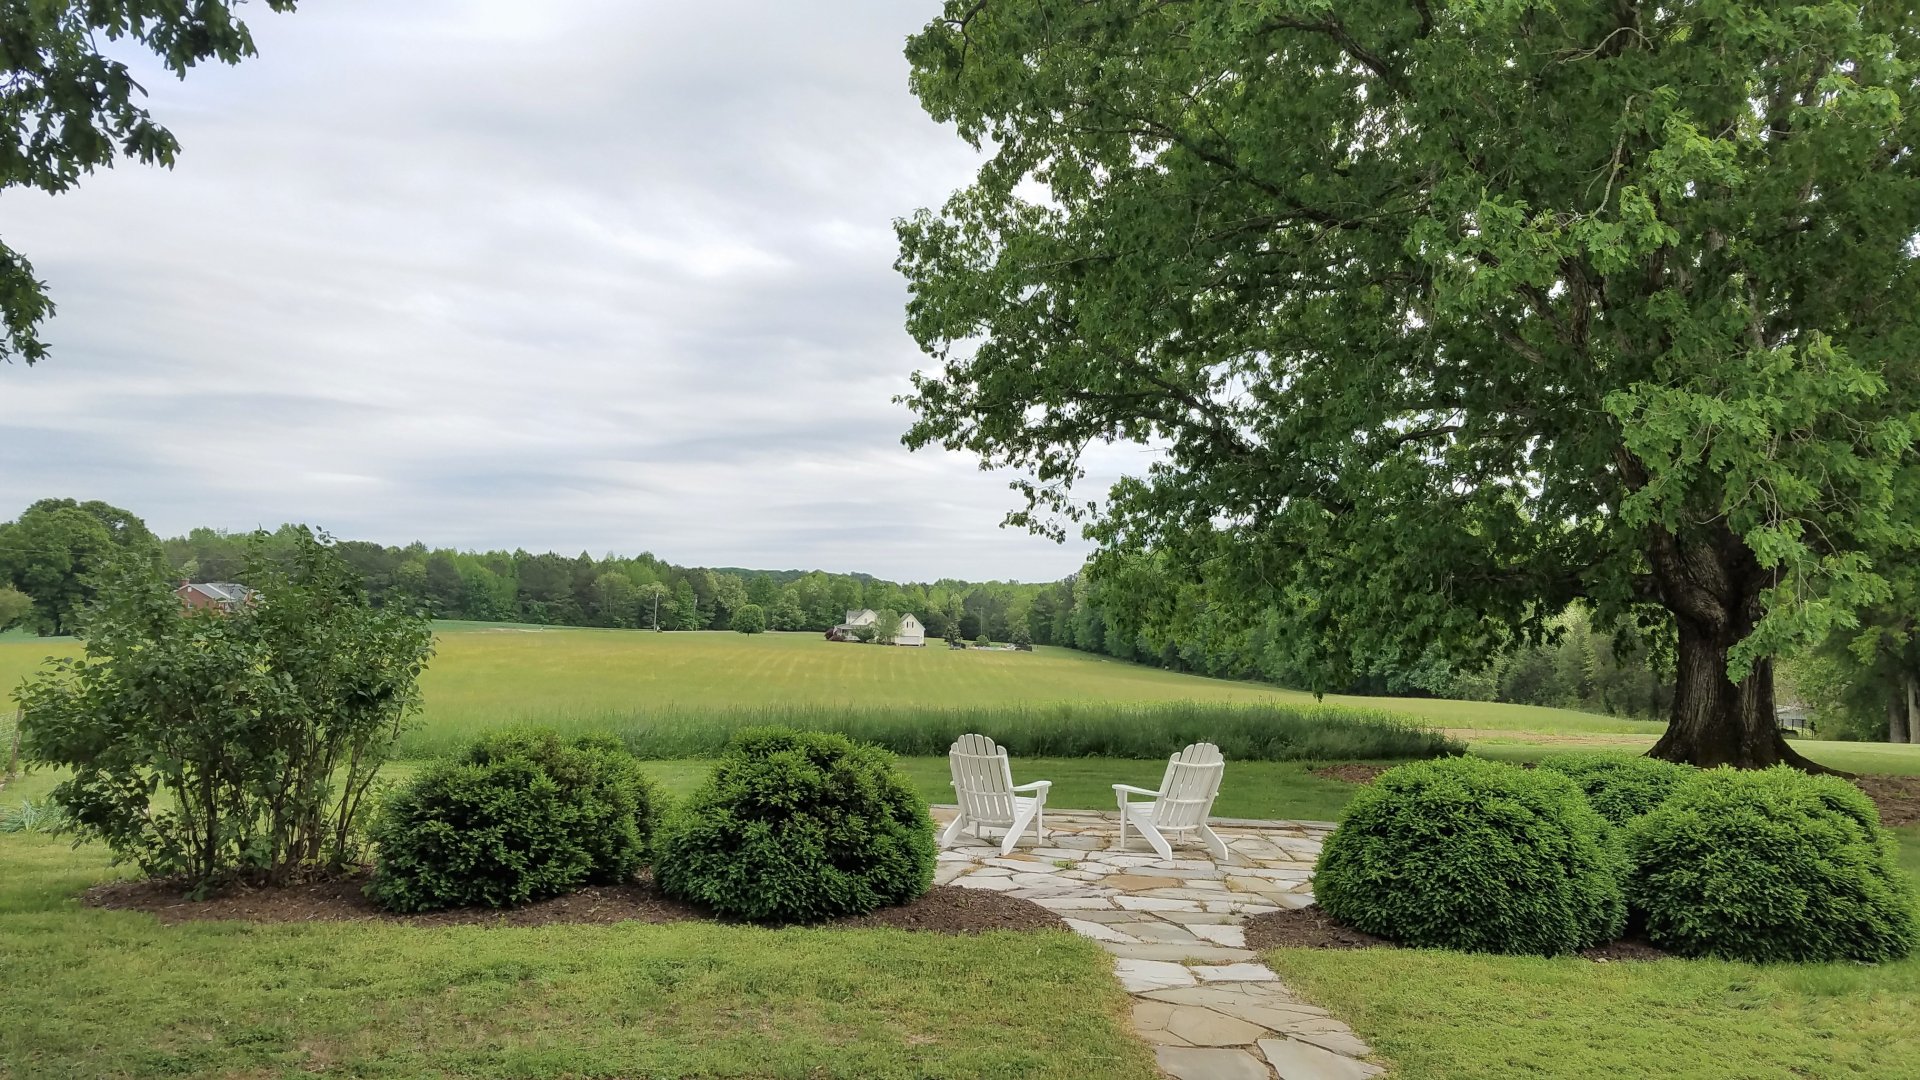 After. Room with a view. : Before/After : Richmond VA Landscape Designer: Gardens by Monit, LLC: Monit Rosendale landscape designer Richmond and Charlottesville Virginia and Fredericksburg Virginia and Williamsburg Virginia